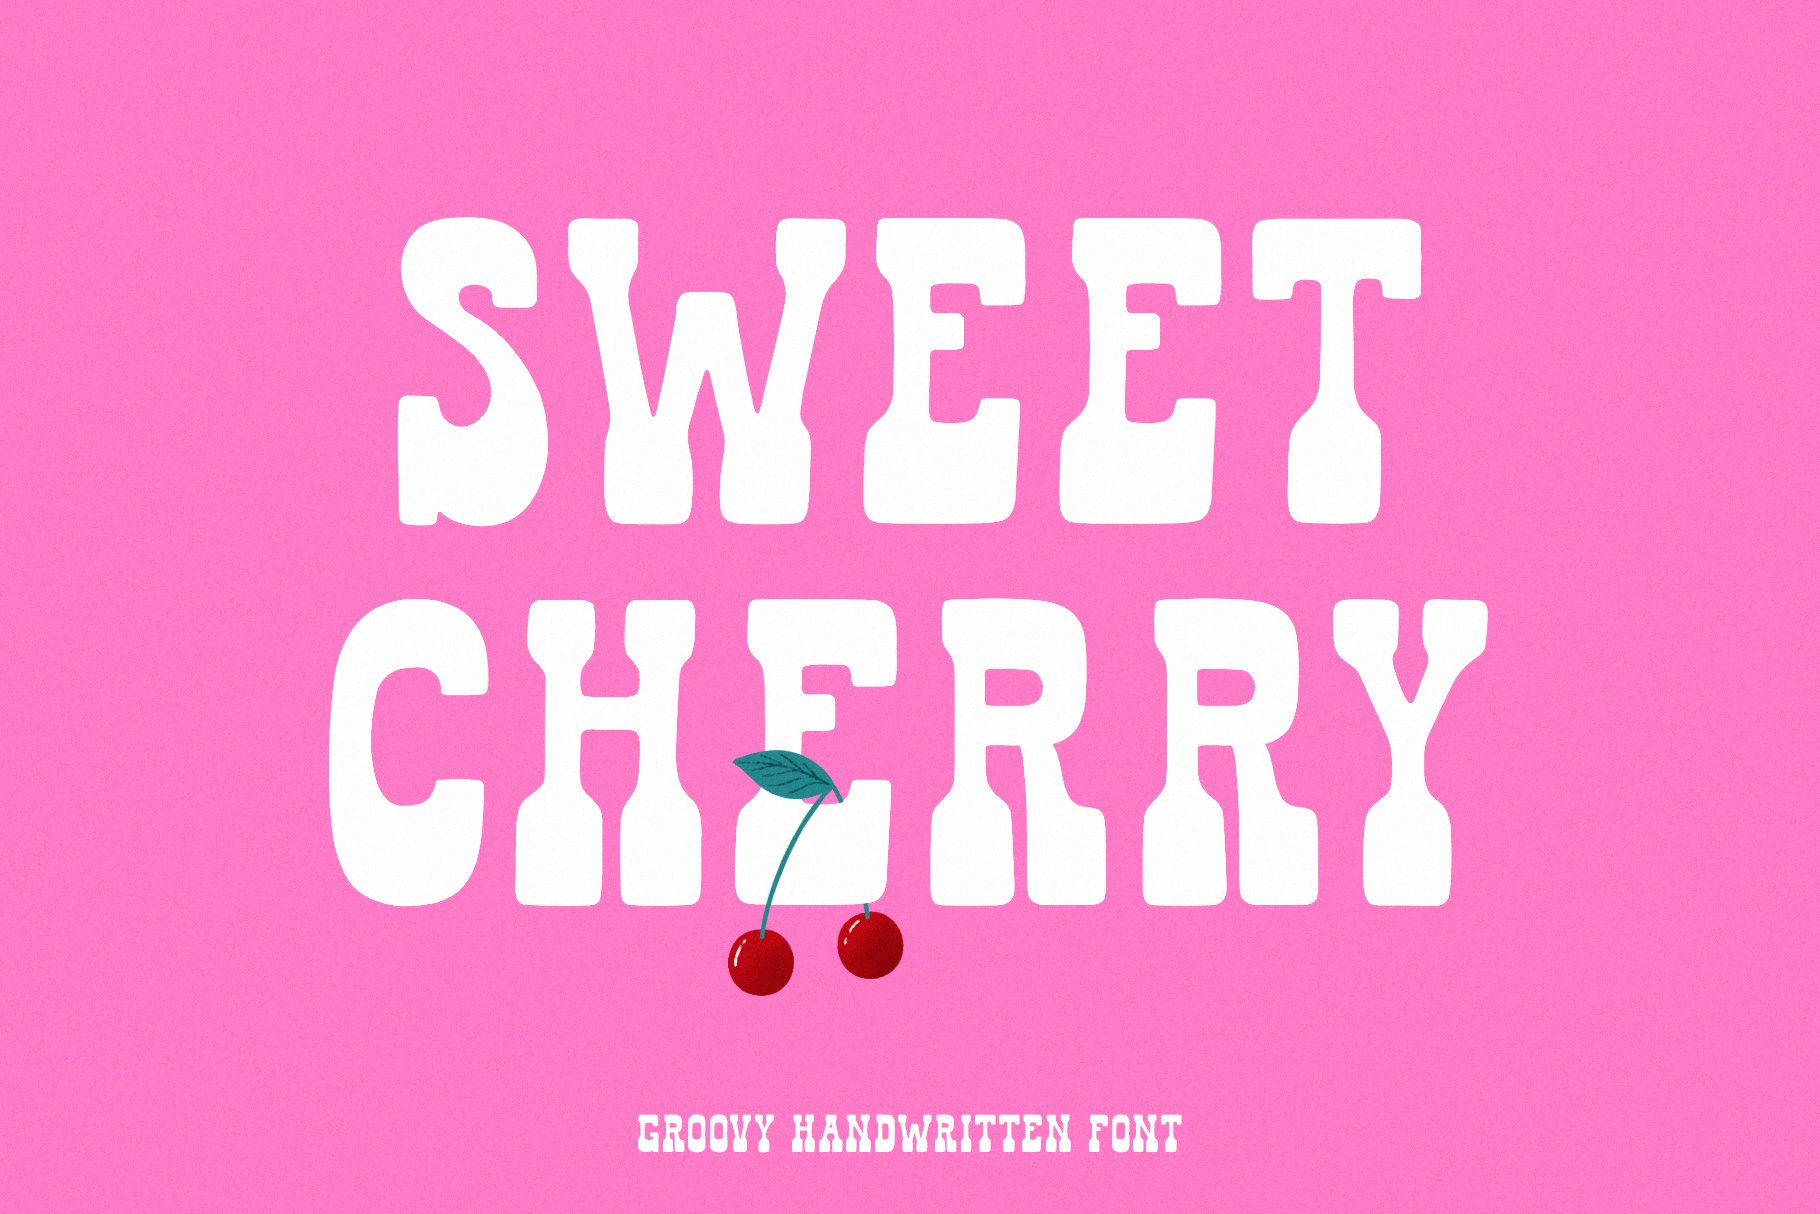 Sweet cherry - a groovy font cover image.